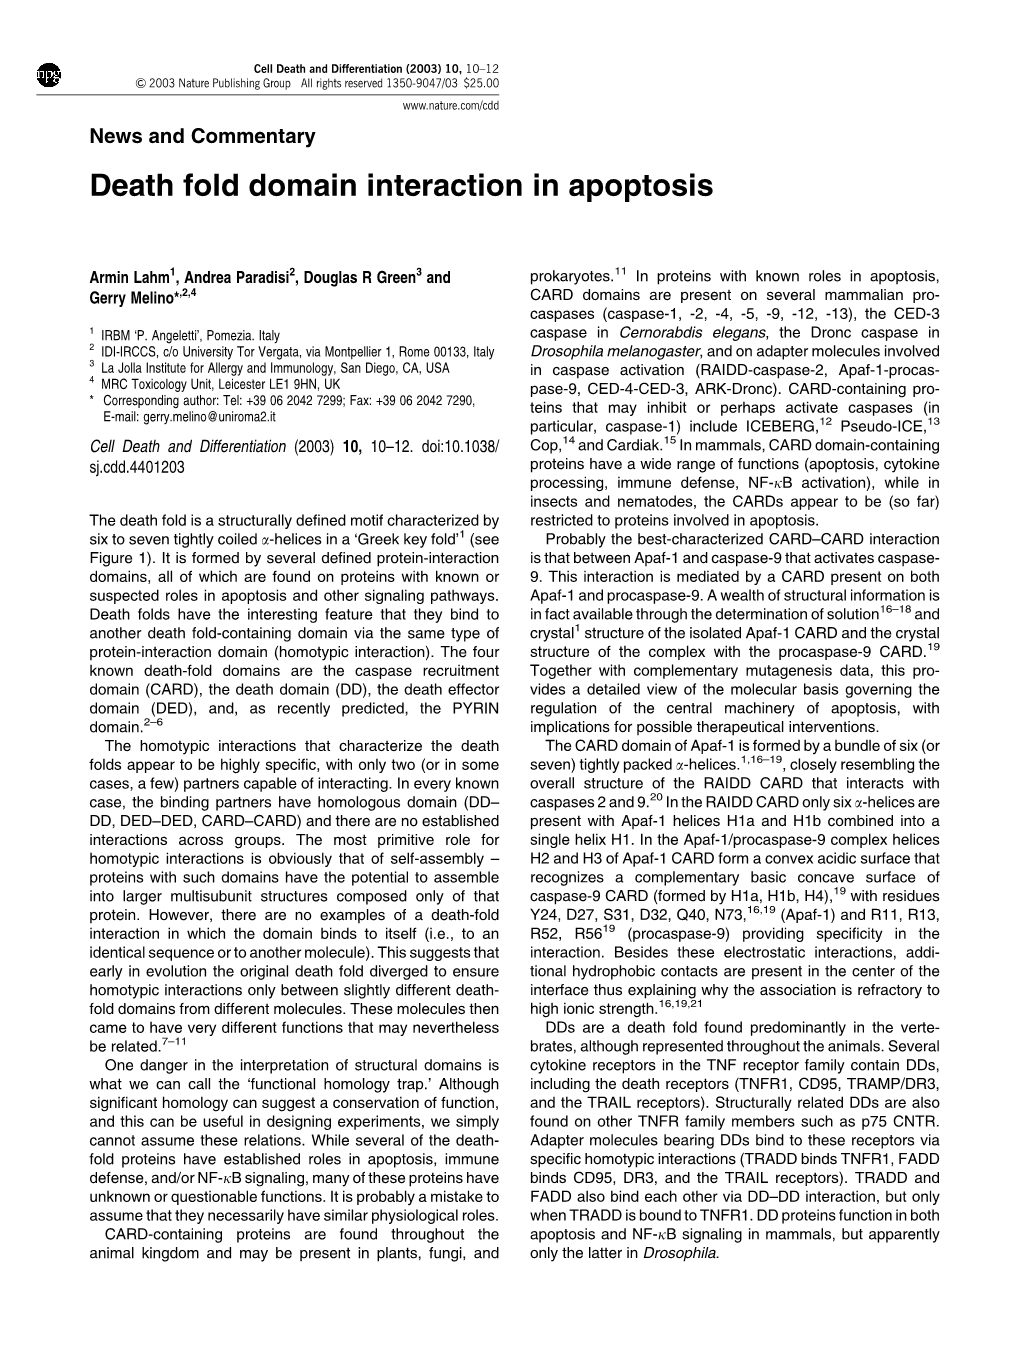 Death Fold Domain Interaction in Apoptosis